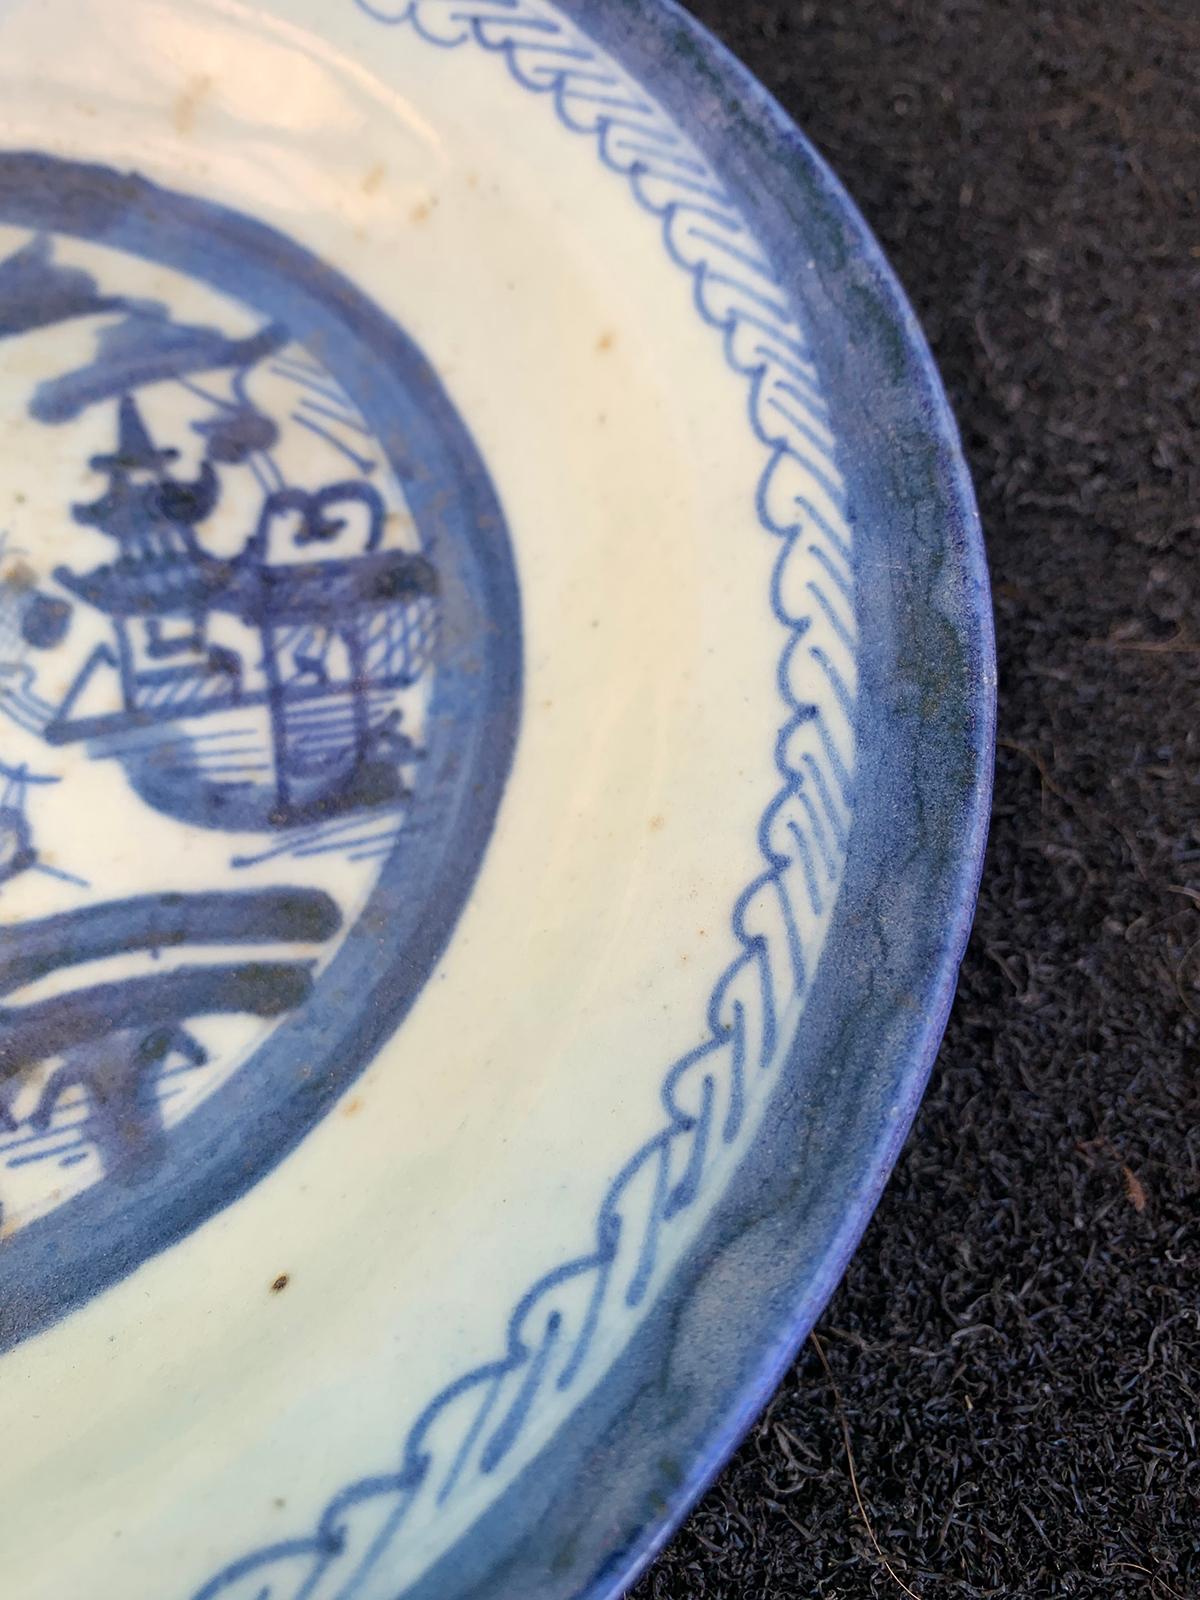 19th Century Chinese Export Canton Ware Blue & White Porcelain Plate, Unmarked For Sale 5